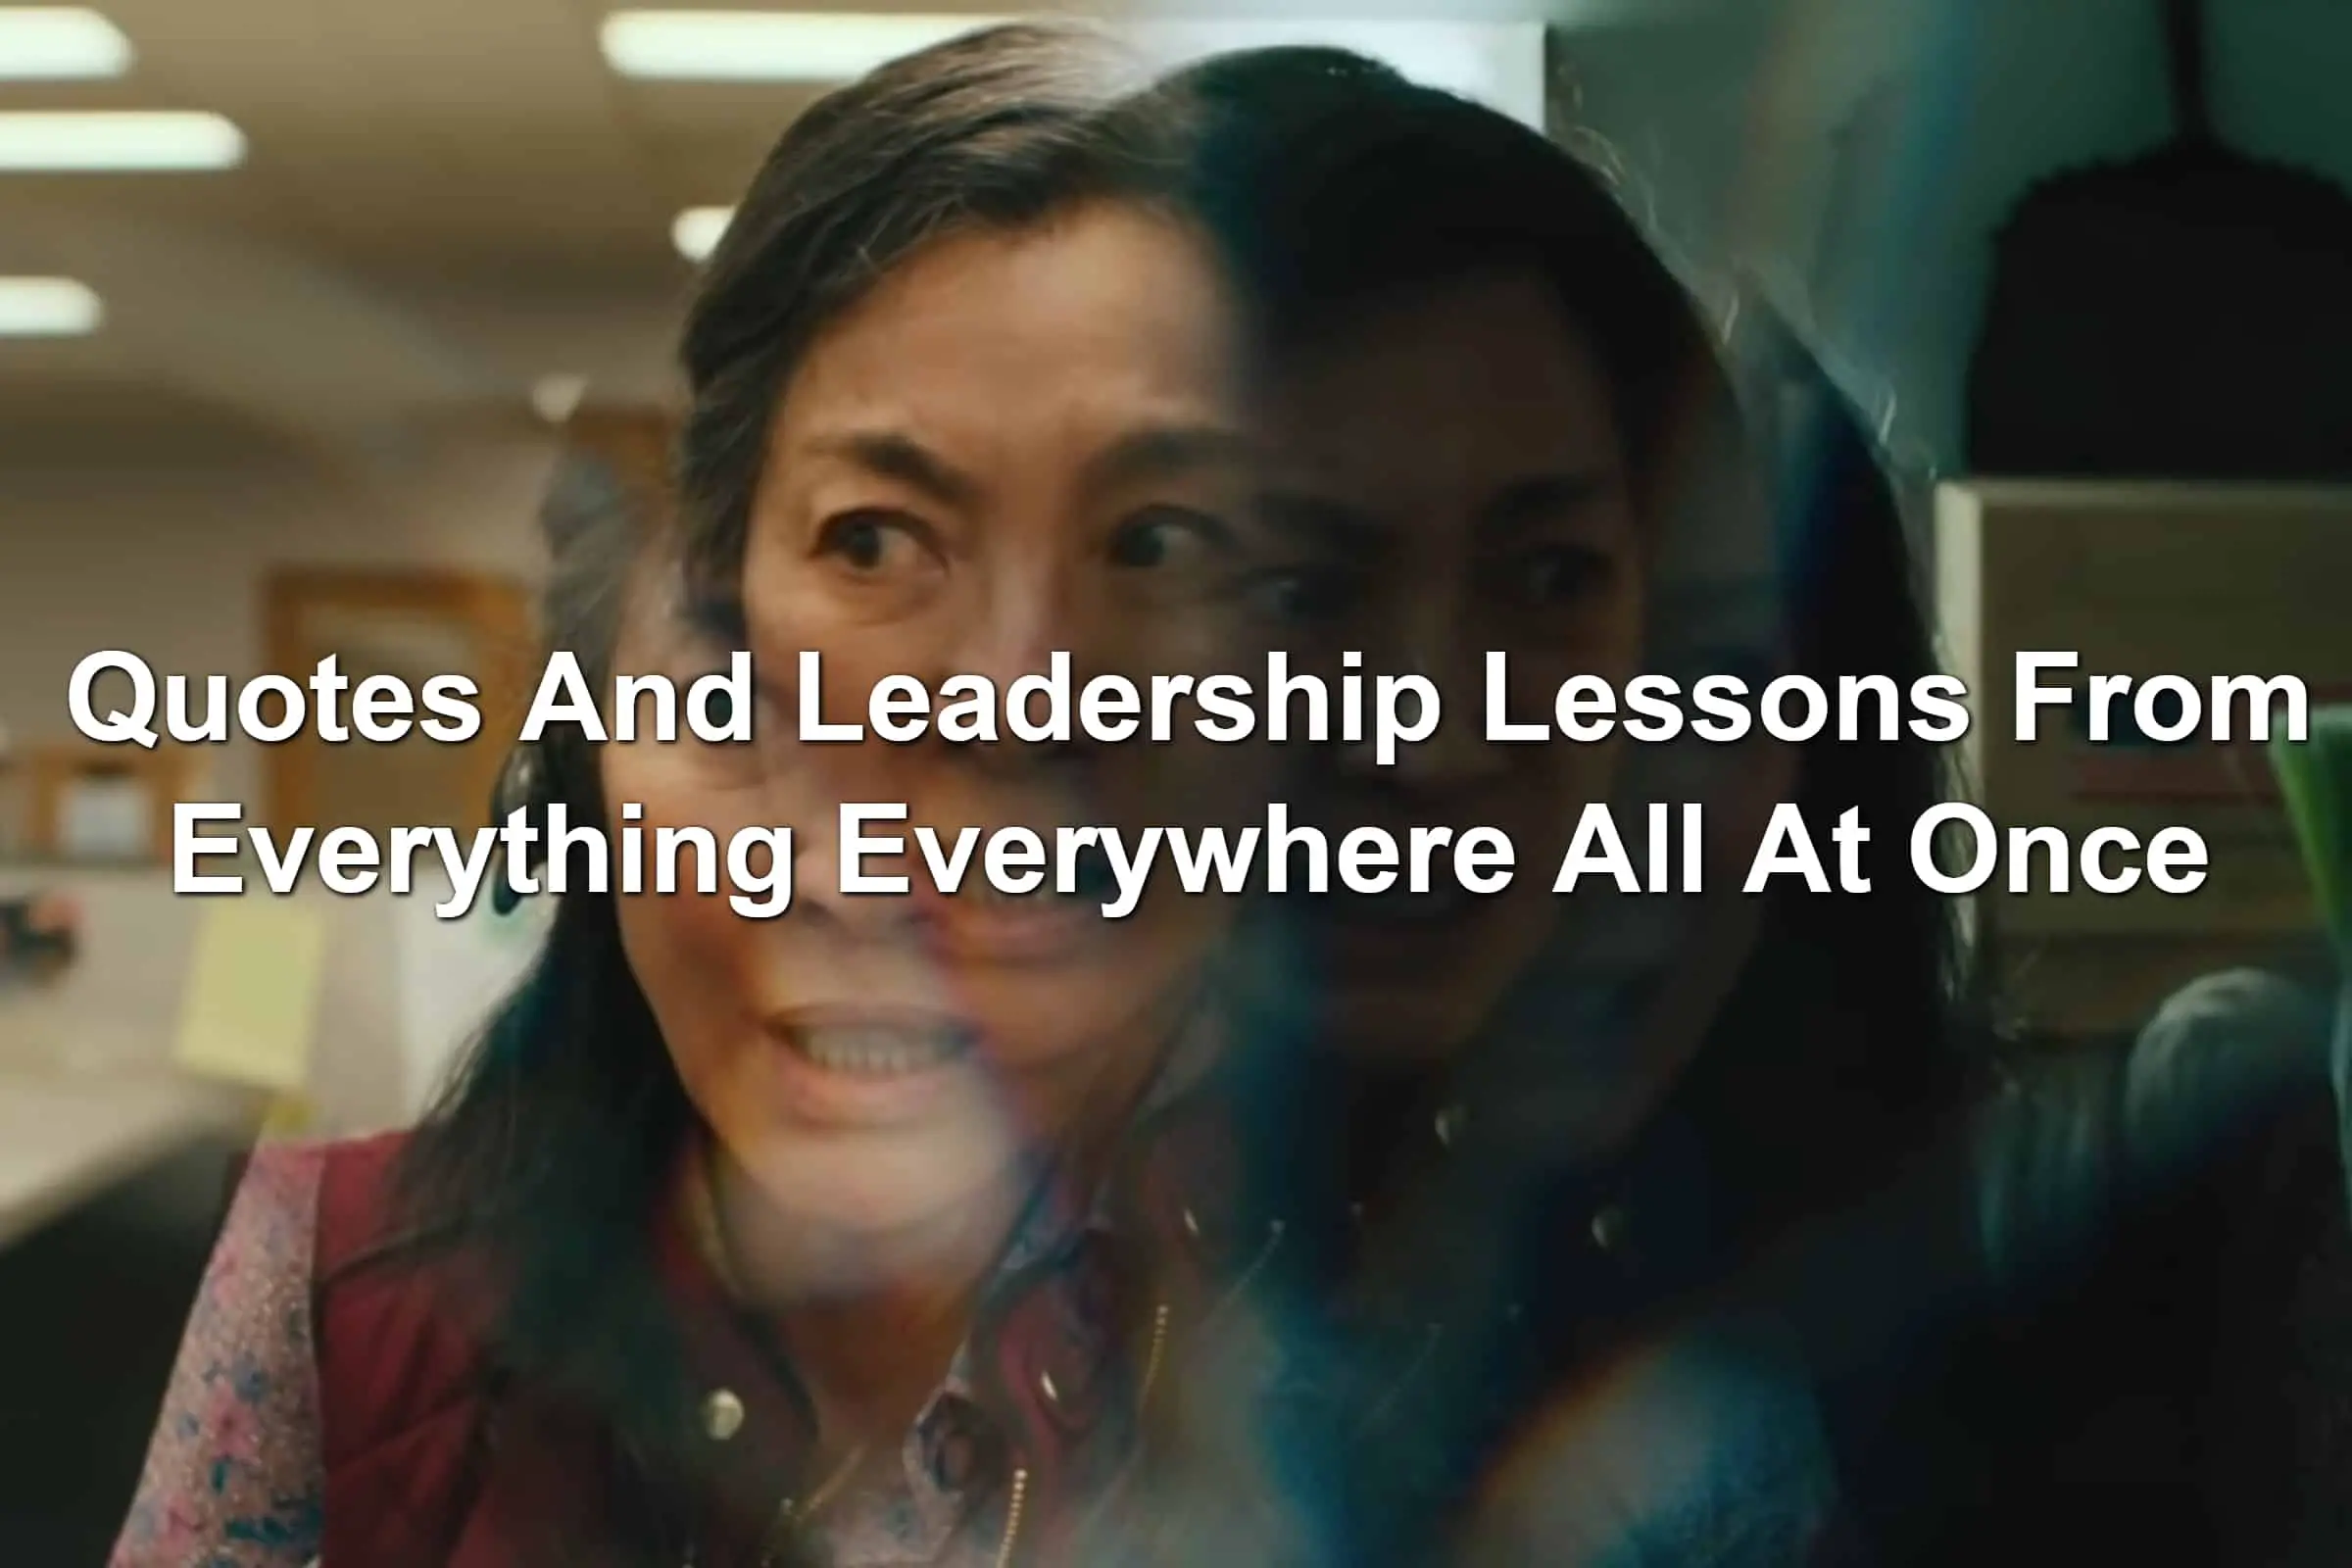 Michelle Yeoh as Evelyn in Everything Everywhere All At Once